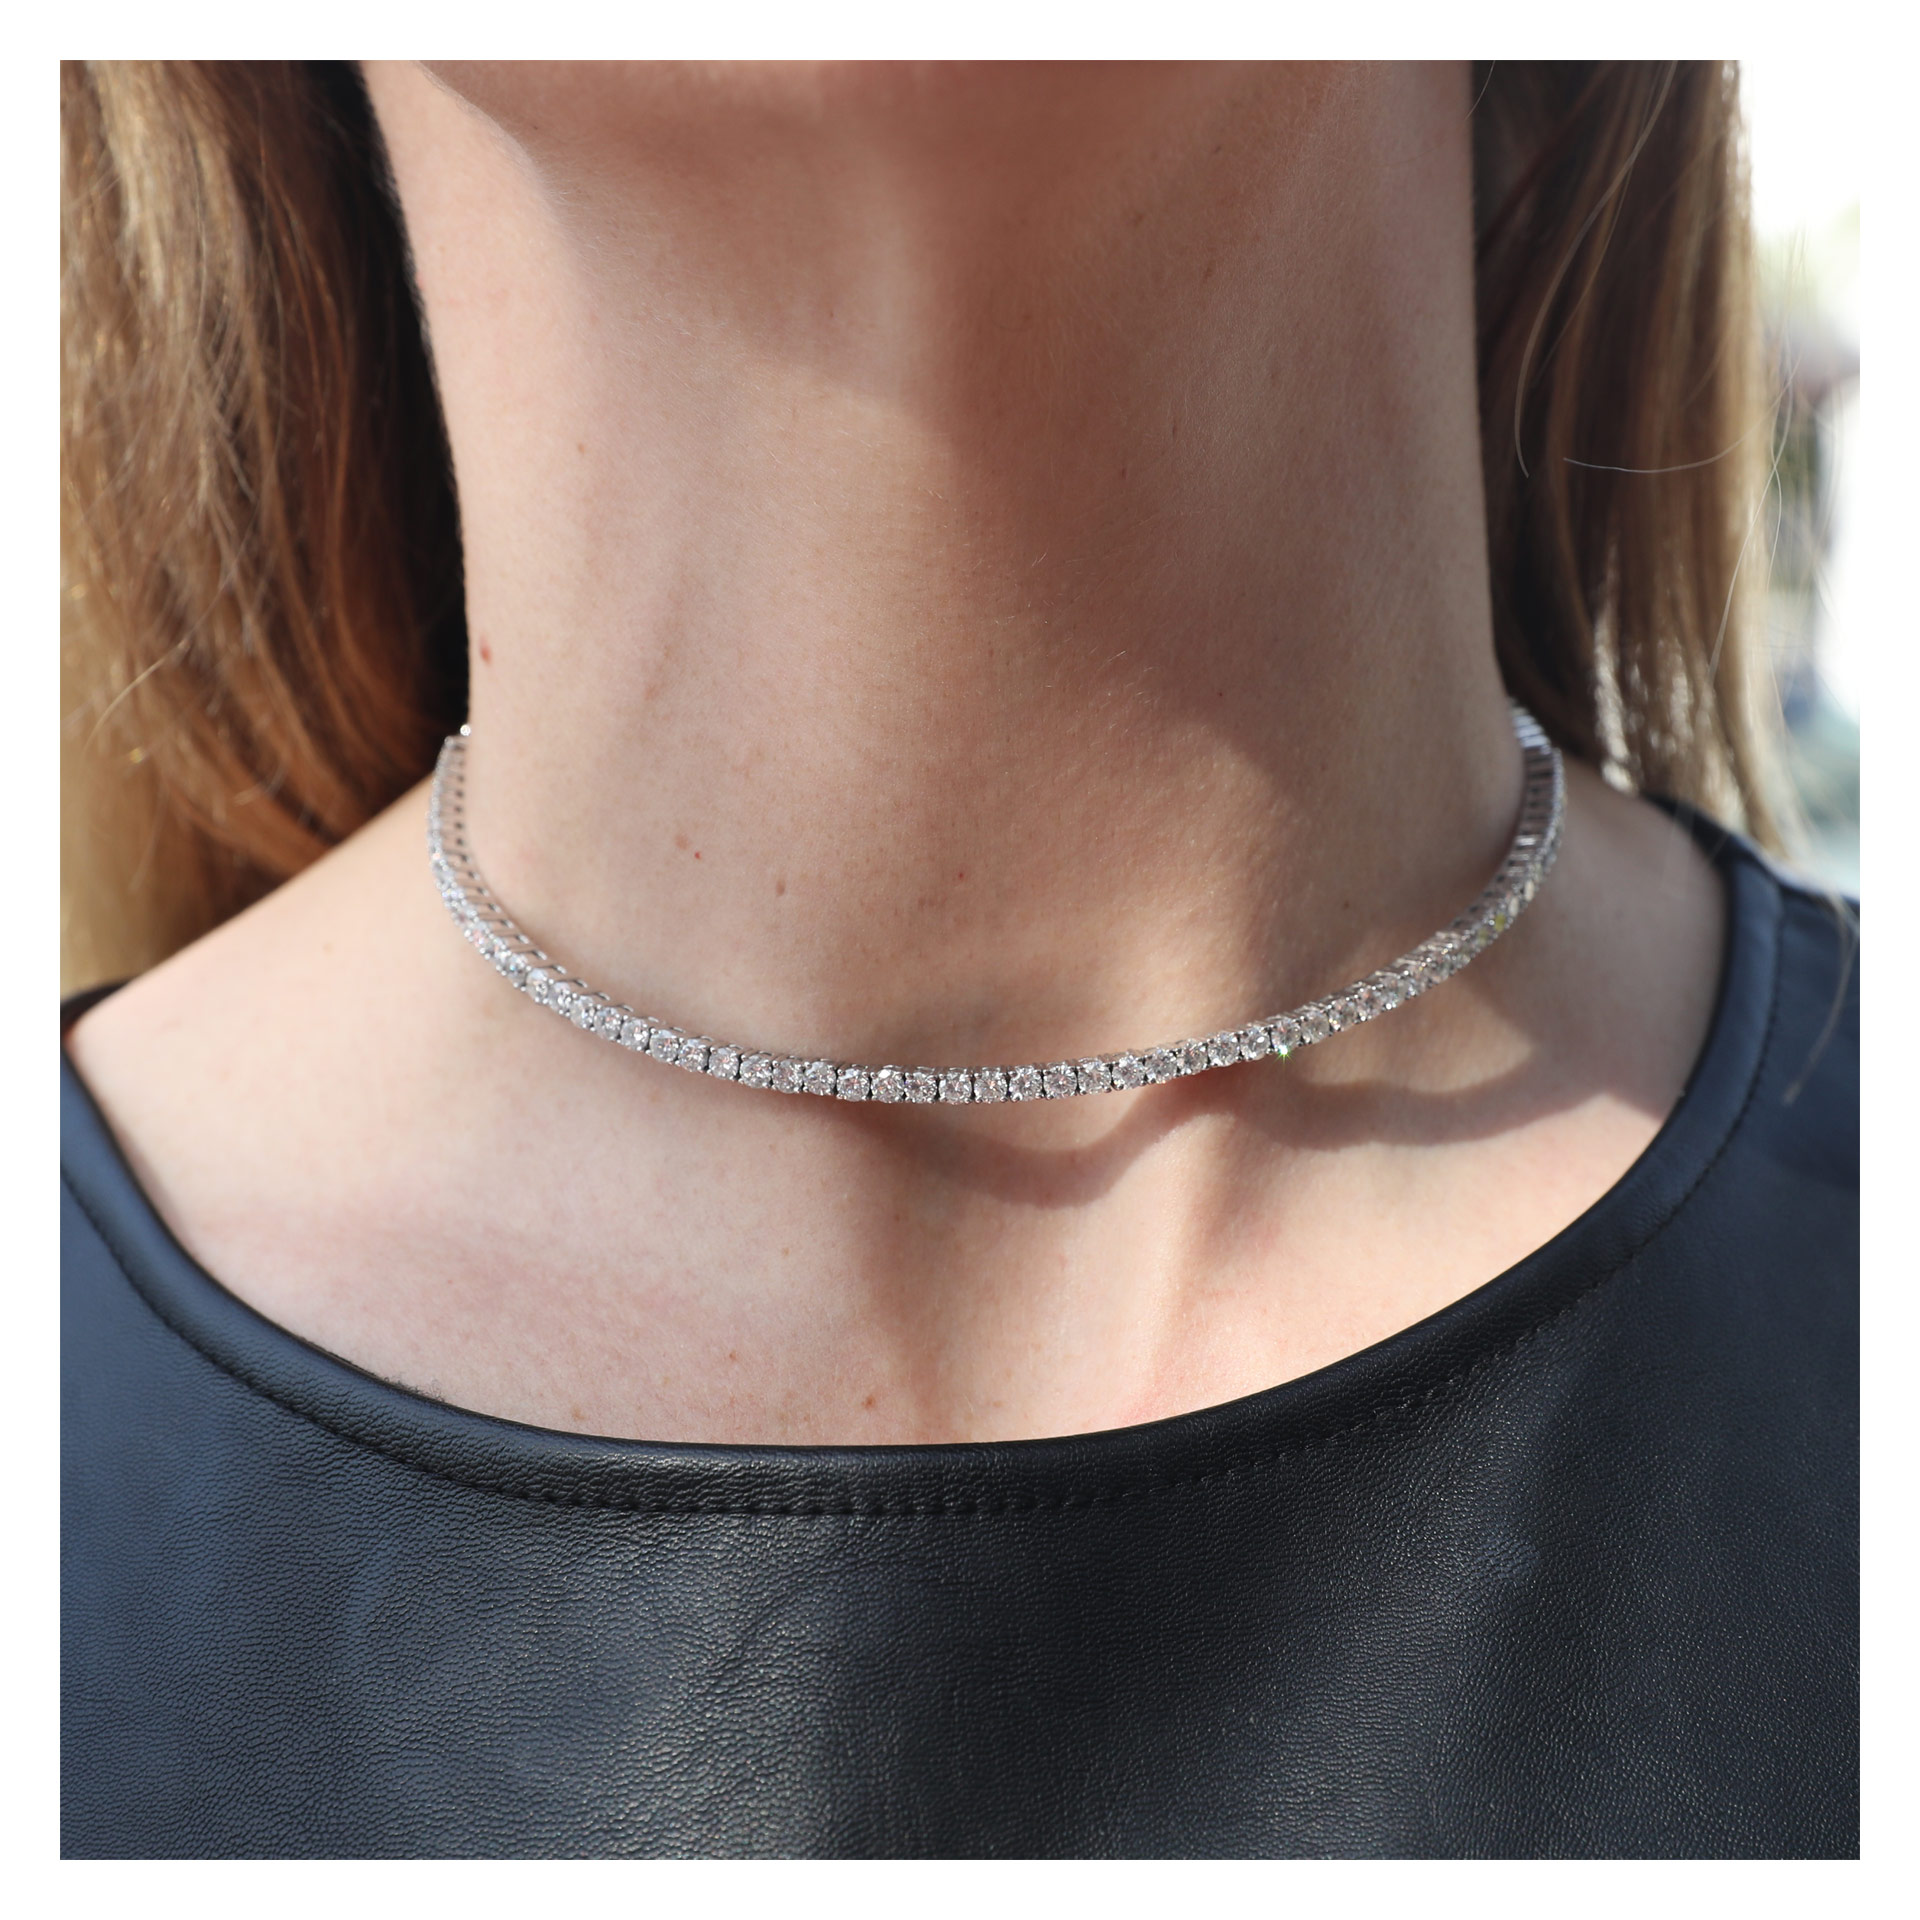 Sparkling diamond choker necklace in 8.39 carats of white clean diamonds image 1